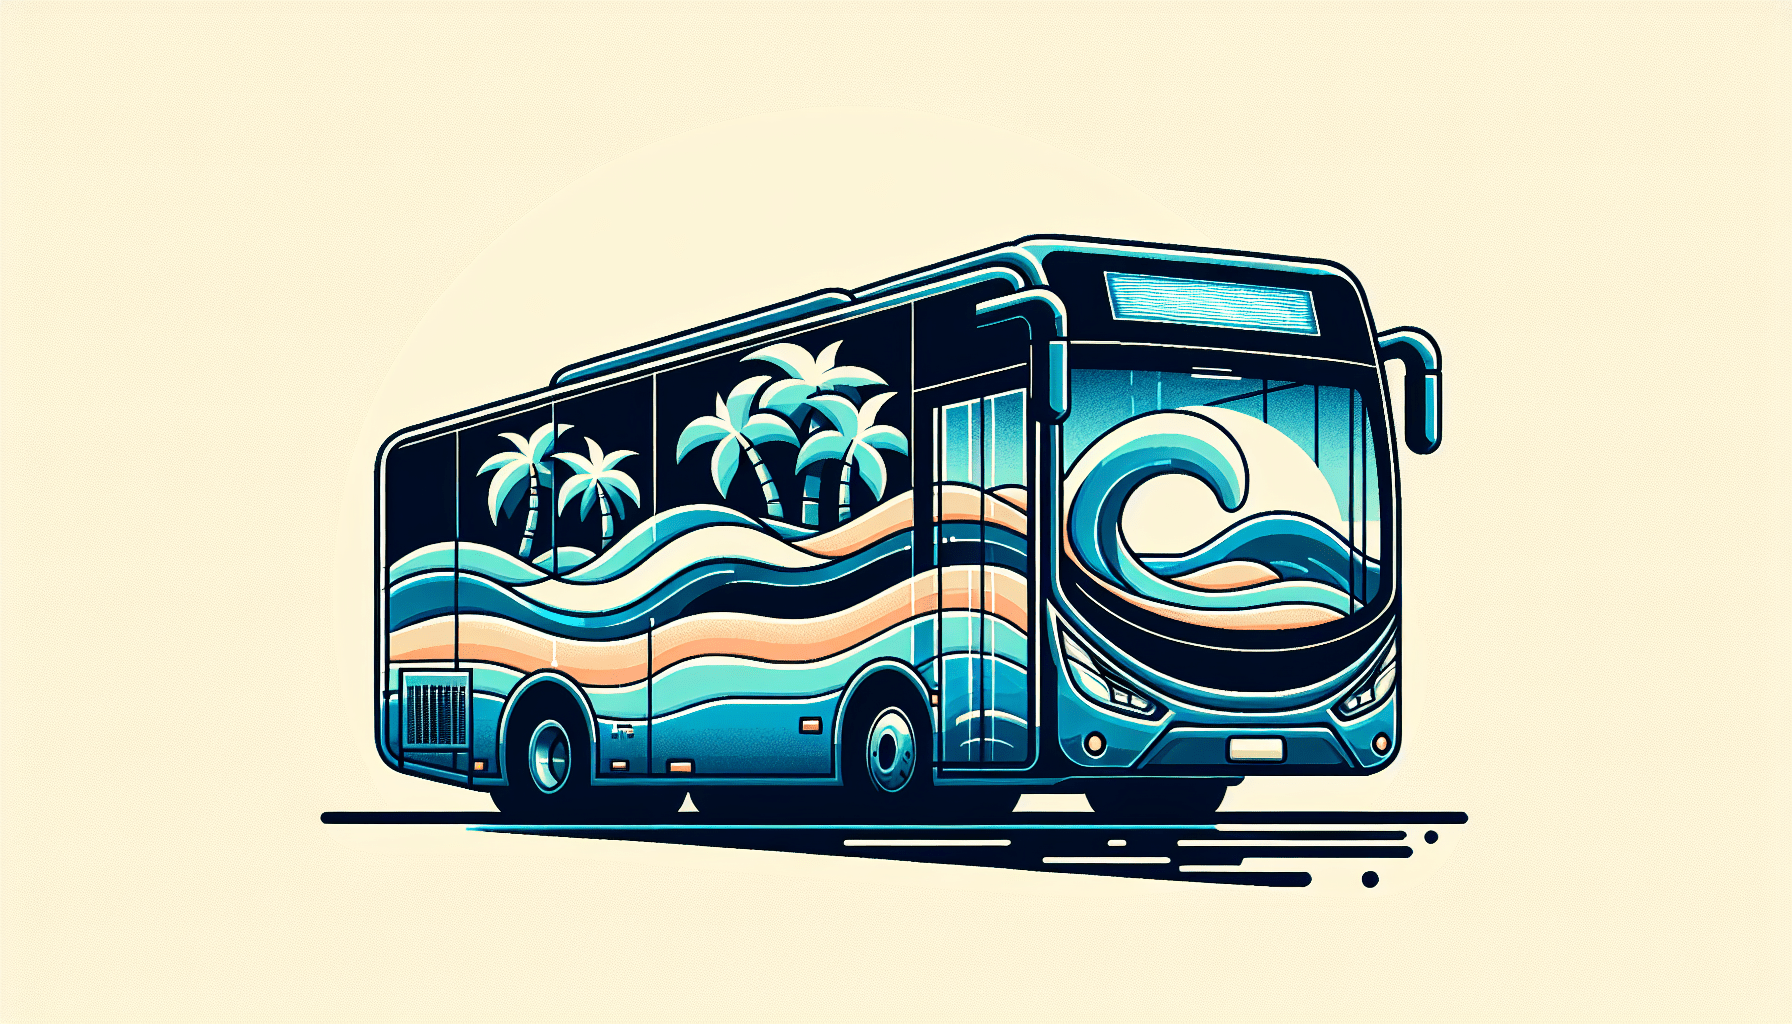 Can I Find Information On The Availability Of Public Transportation To Beach Destinations?